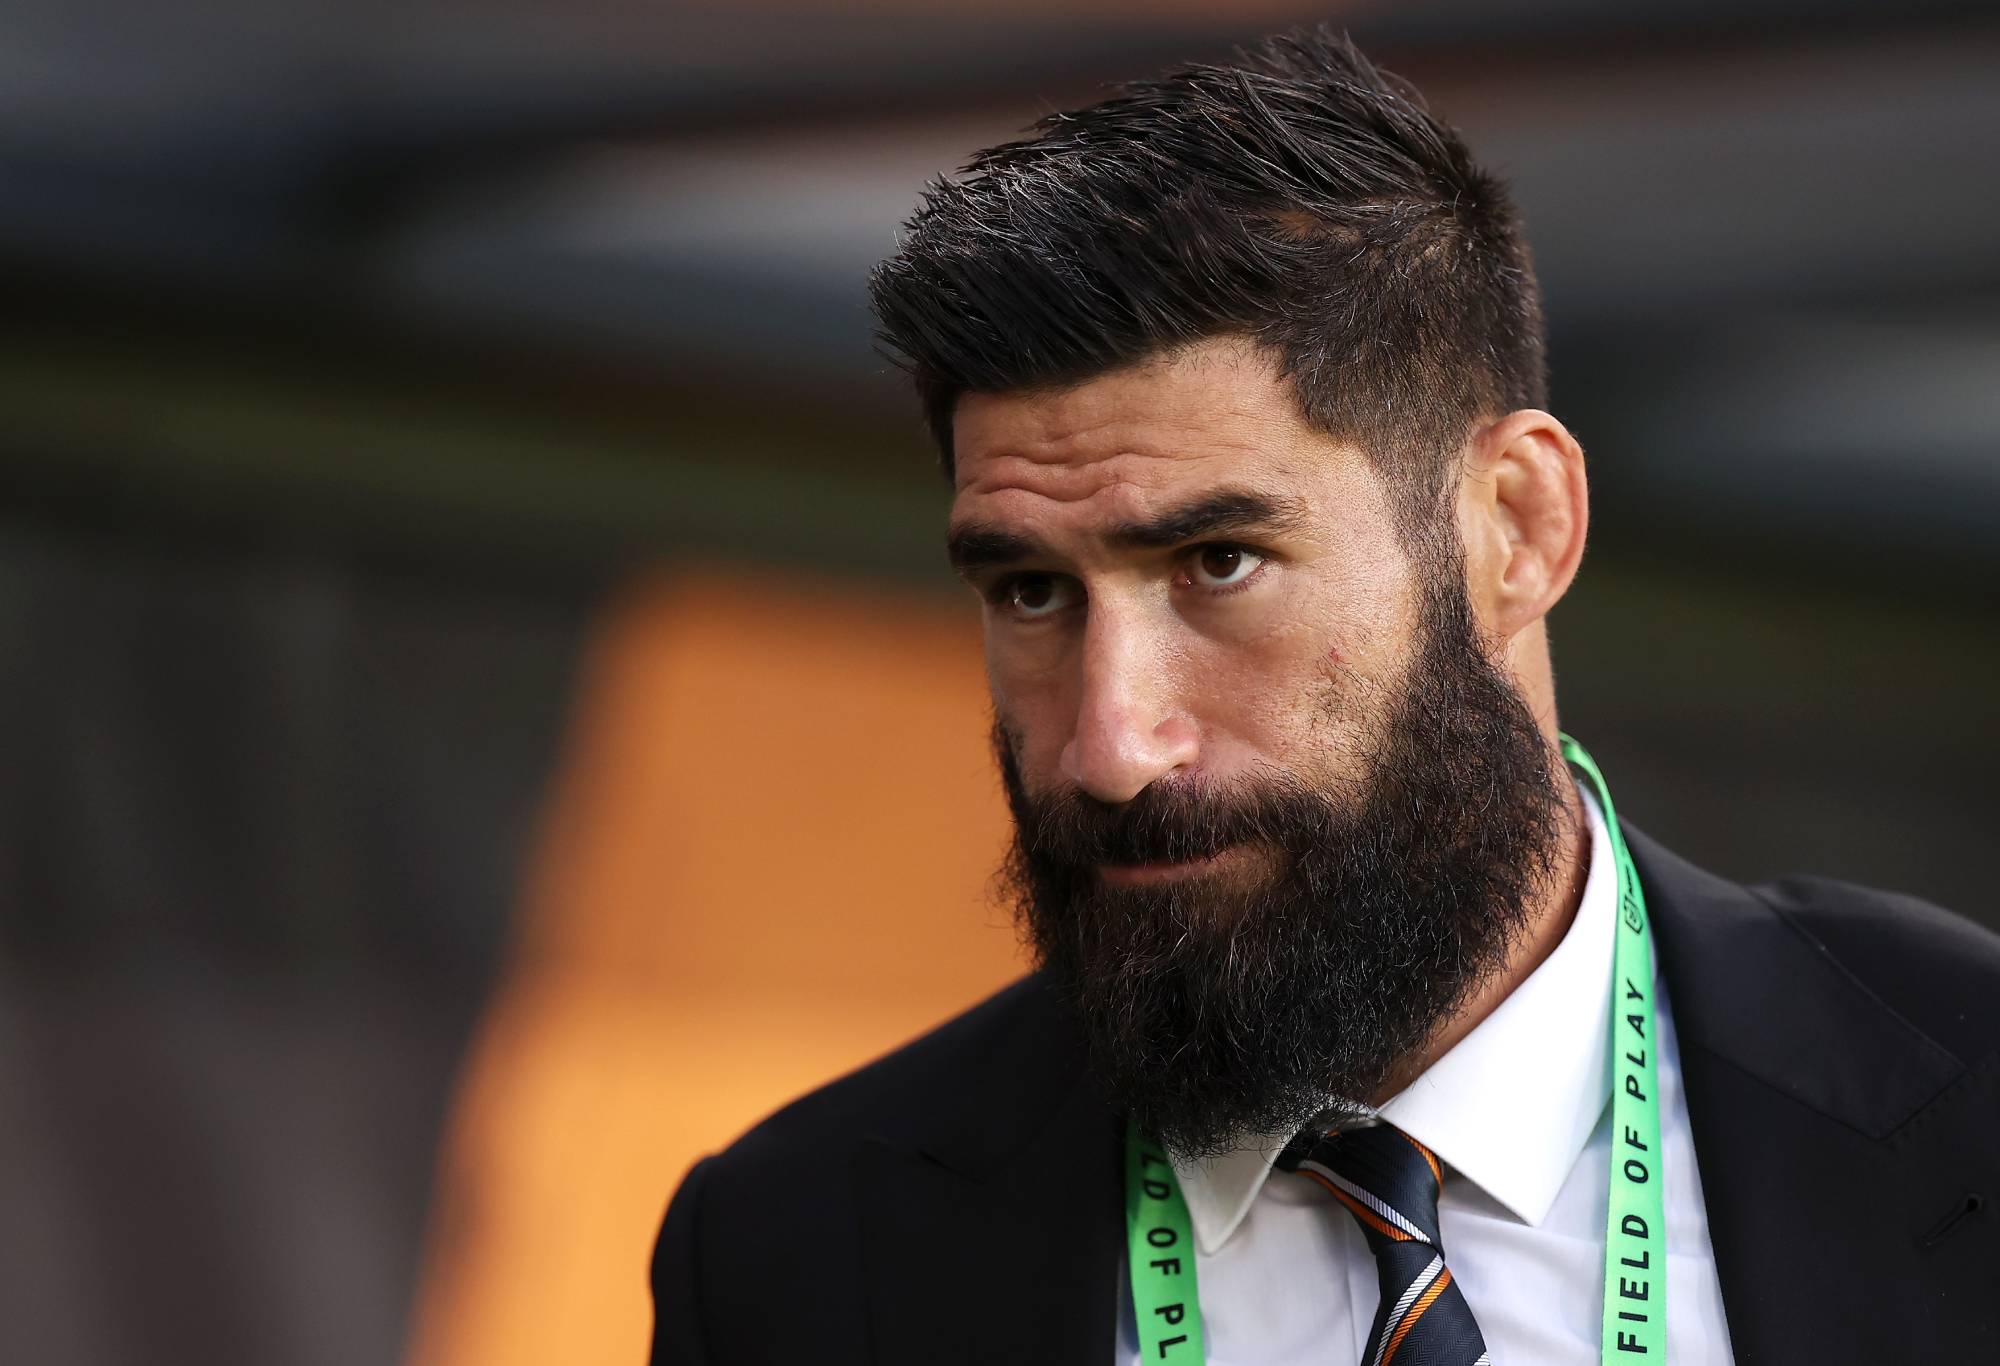 SYDNEY, AUSTRALIA - MARCH 12: James Tamou of the Tigers watches on during the warm-up before the round one NRL match between the Wests Tigers and the Melbourne Storm at CommBank Stadium, on March 12, 2022, in Sydney, Australia. (Photo by Mark Kolbe/Getty Images)